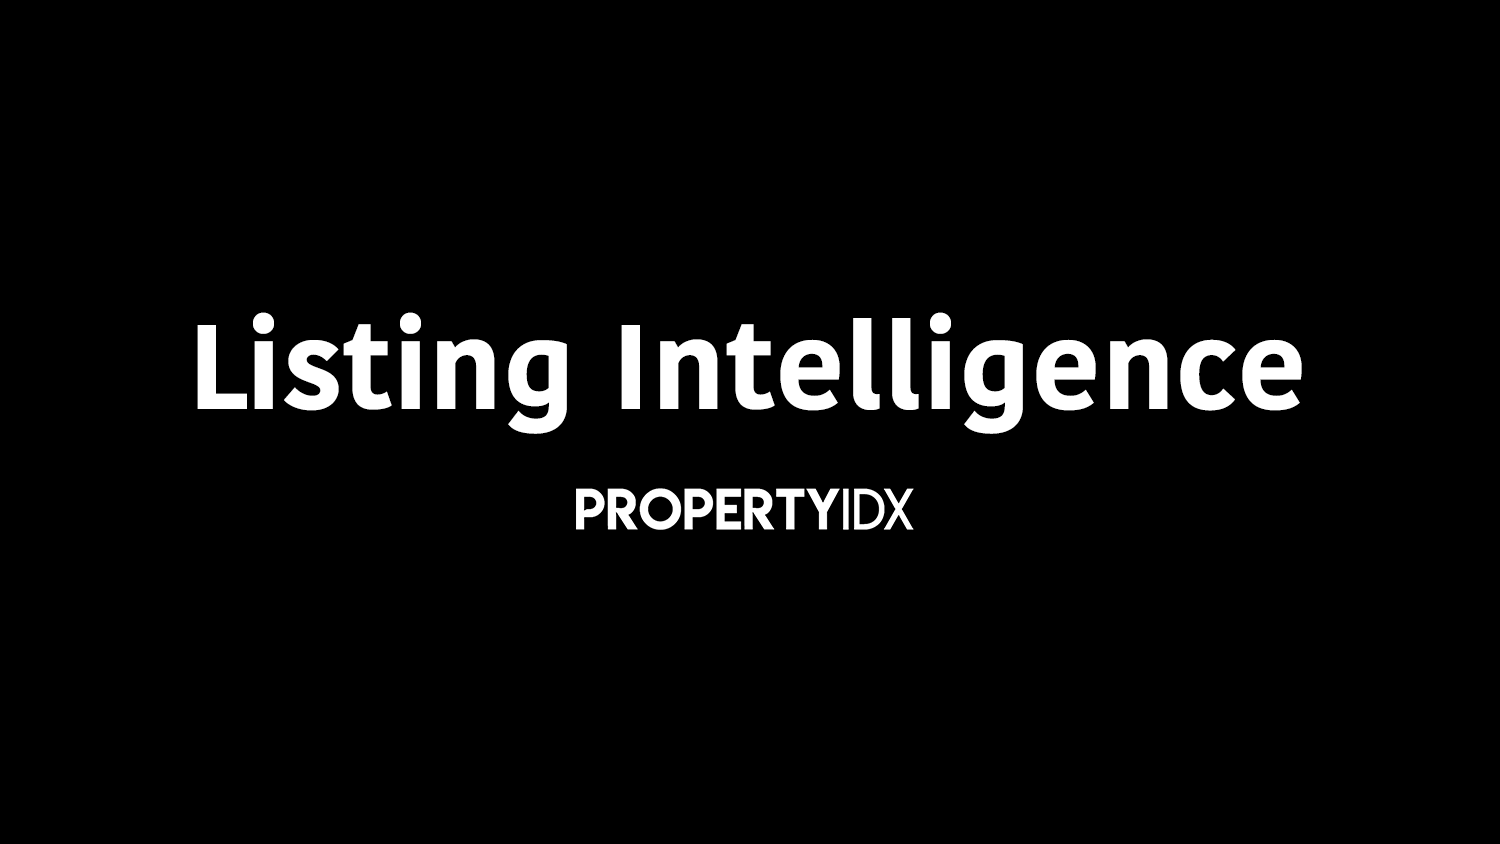 LISTING INTELLIGENCE BY PROPERTYIDX